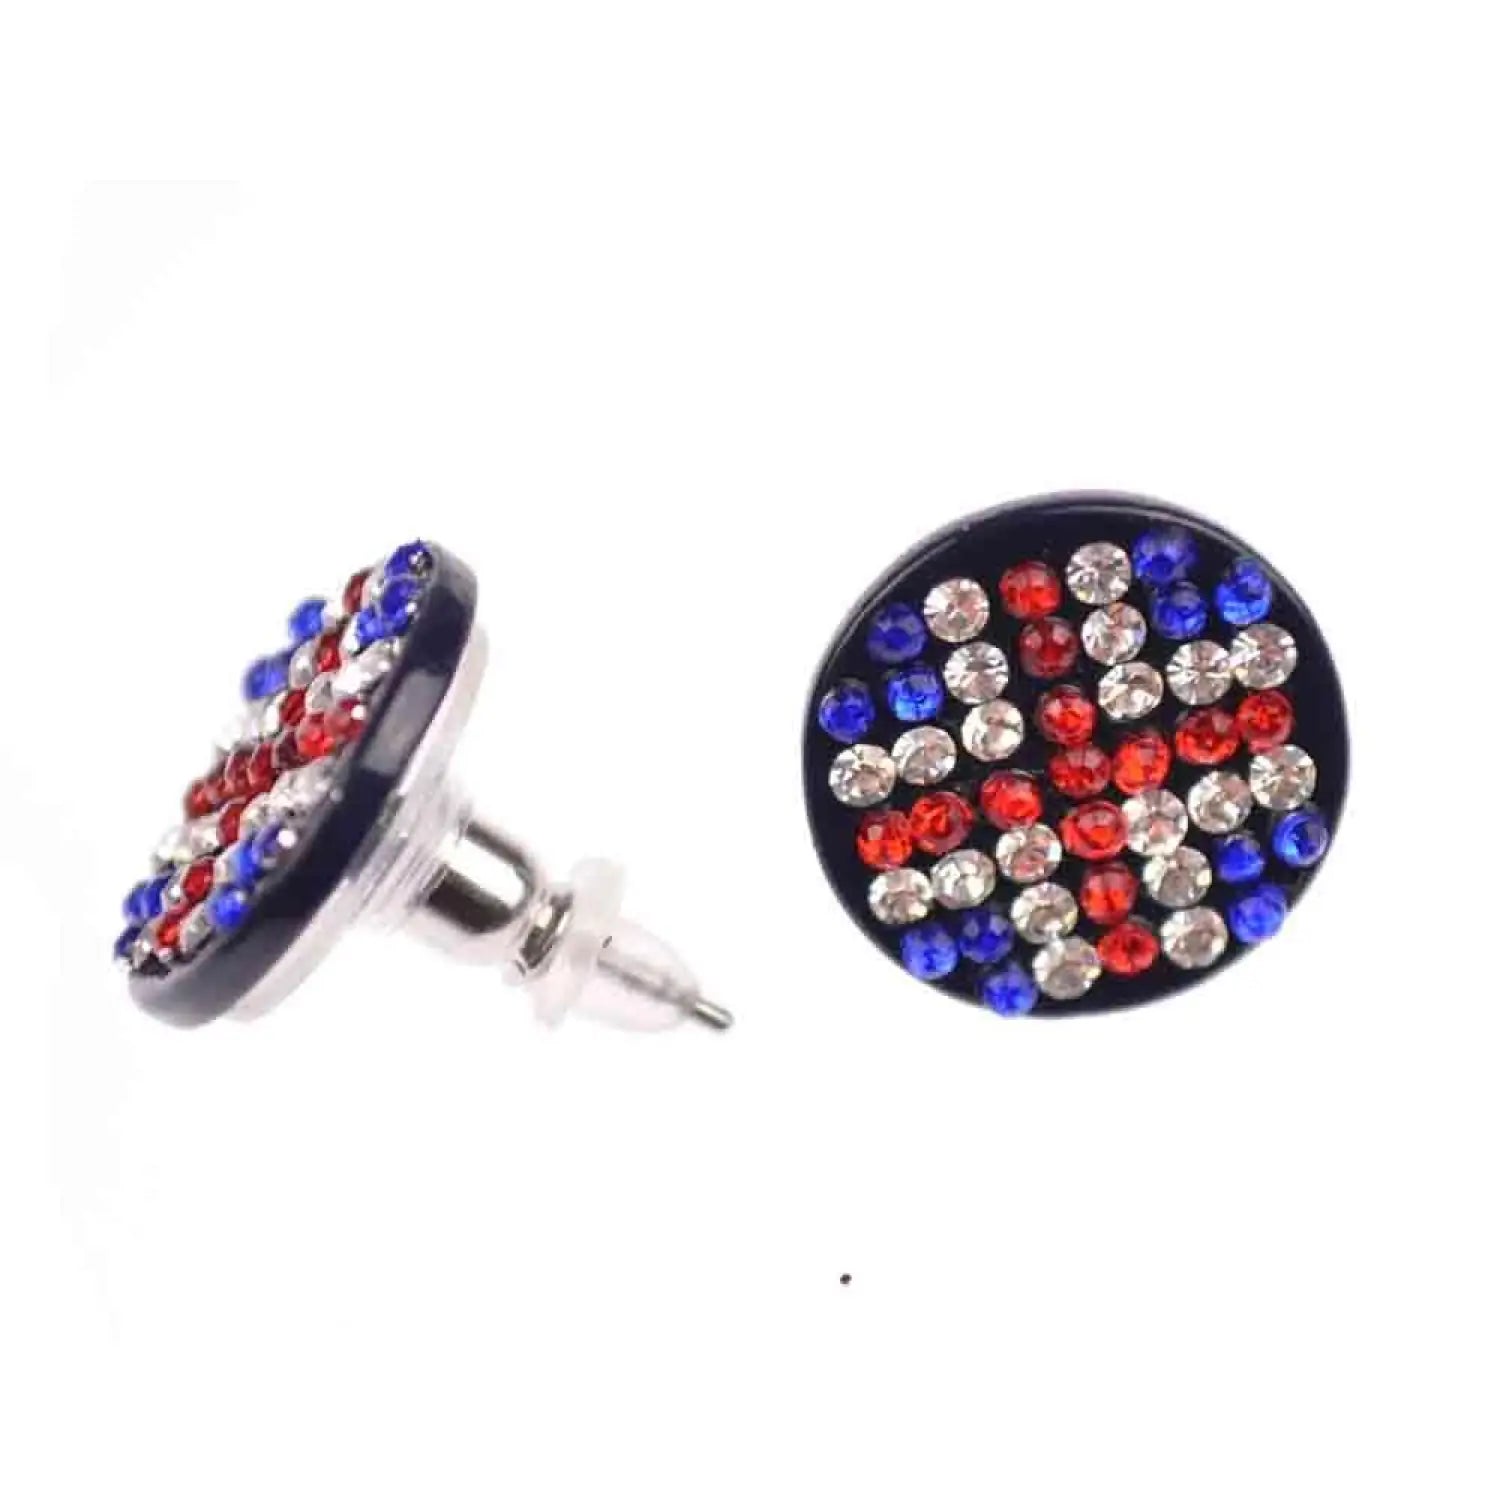 Union Jack Diamante Circle Stud Earrings in red, white, and blue